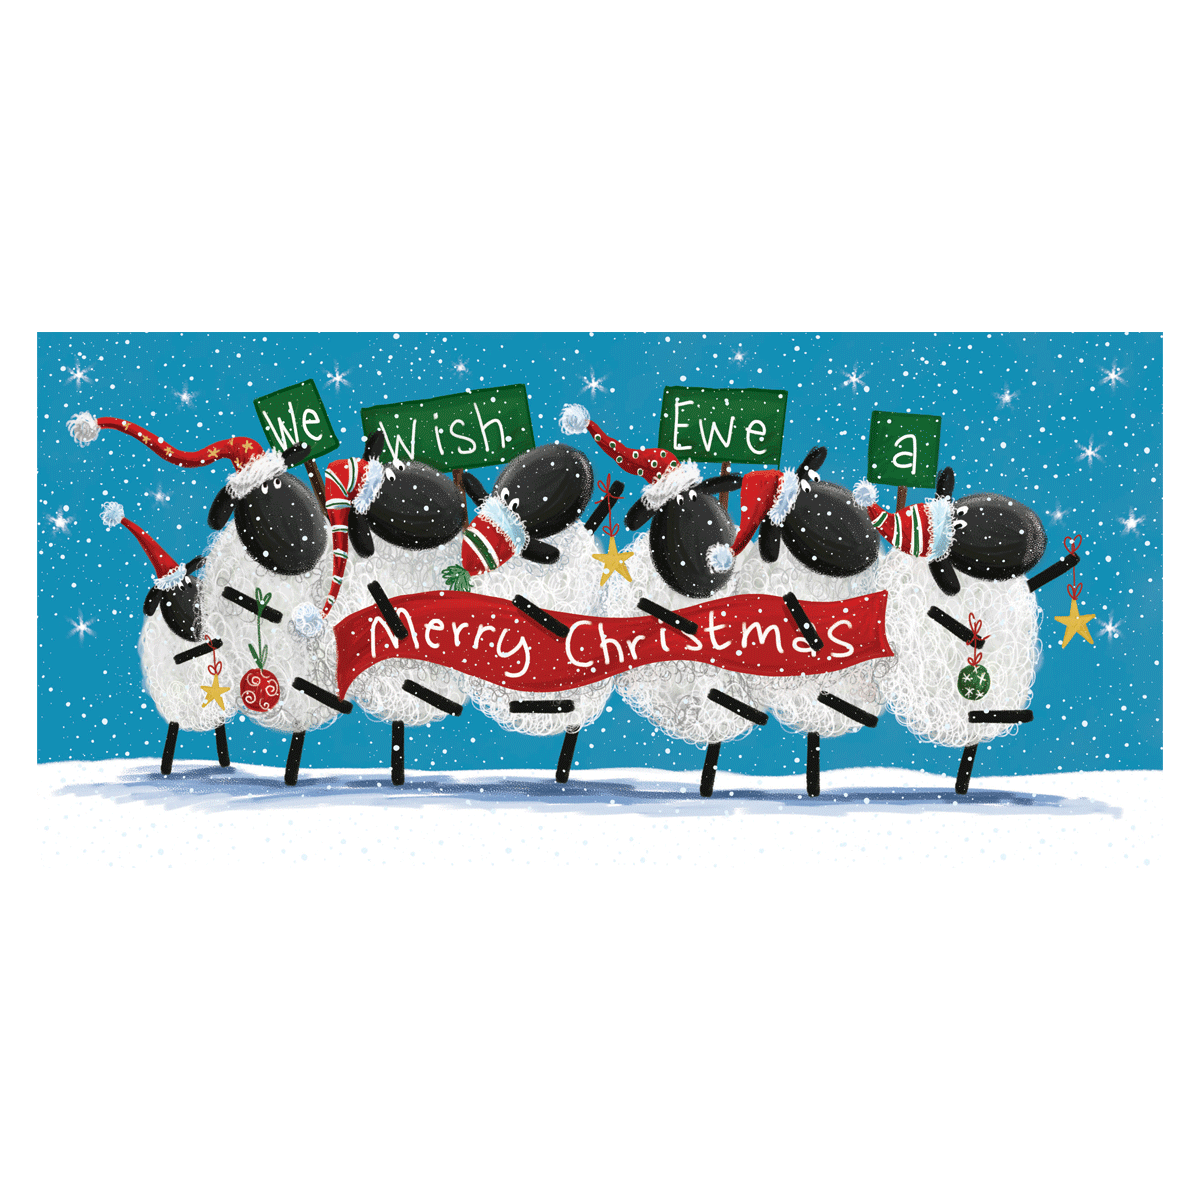 Winter Warmers Christmas Card (10 cards, 2 designs)